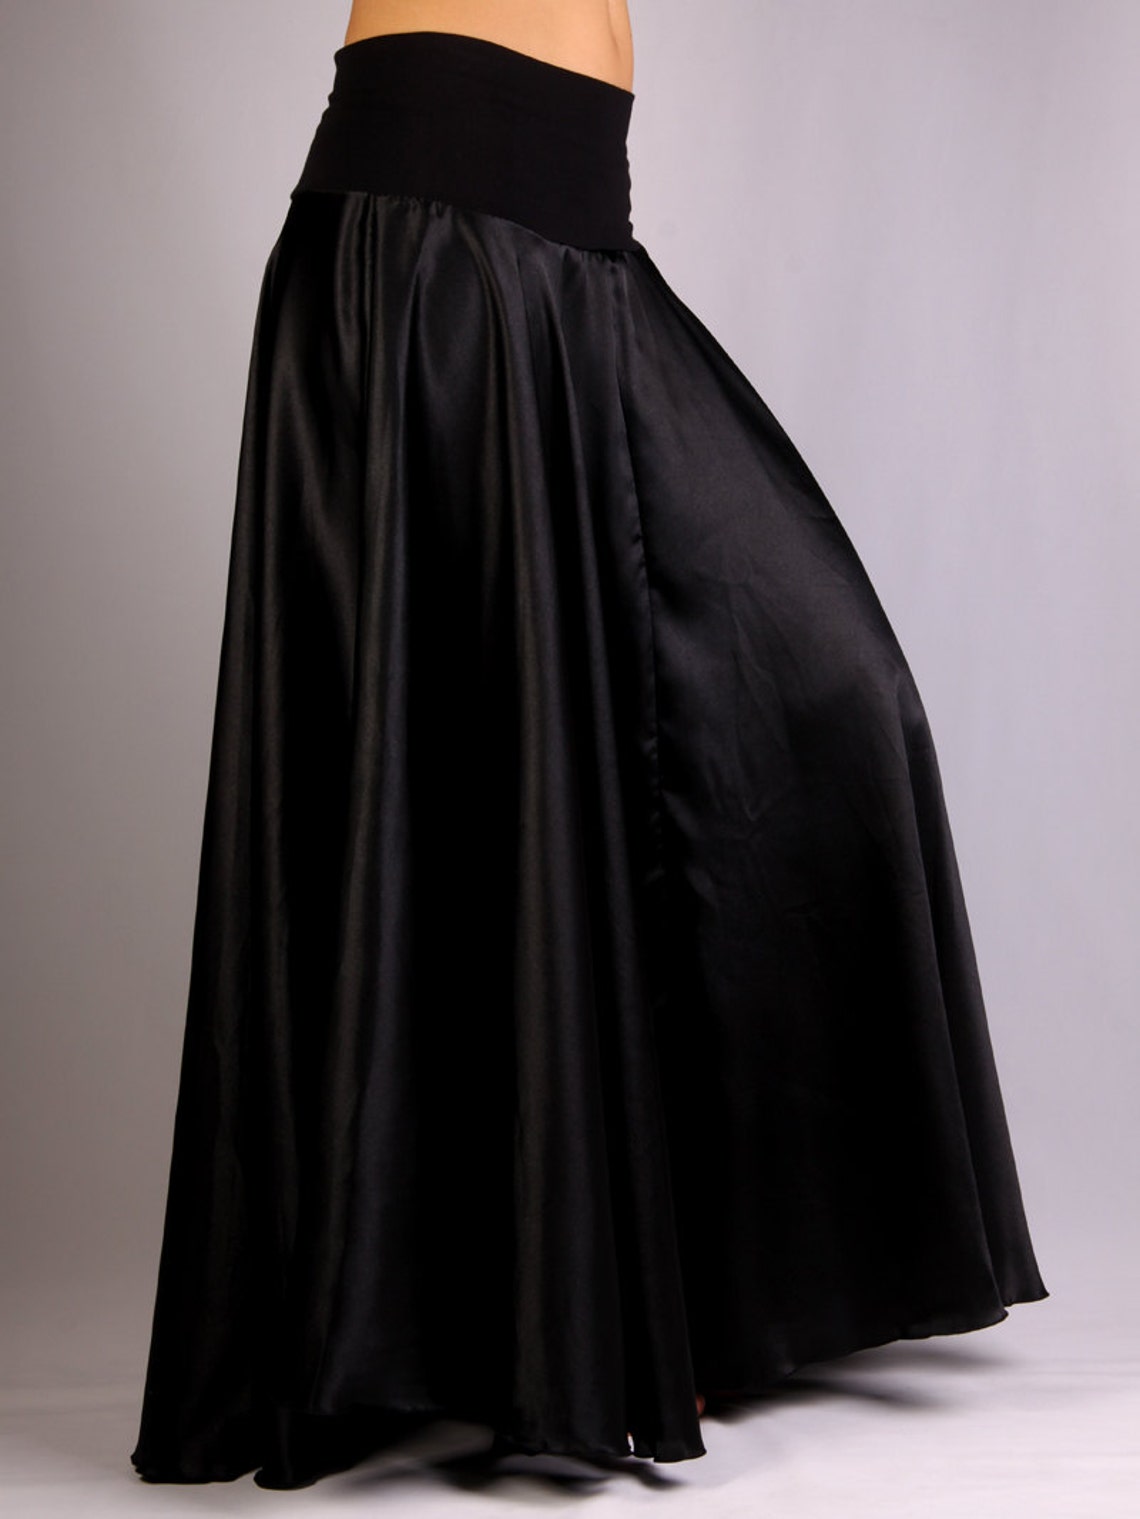 Claire Long Skirt in Black Satin and Black Lycra - Etsy